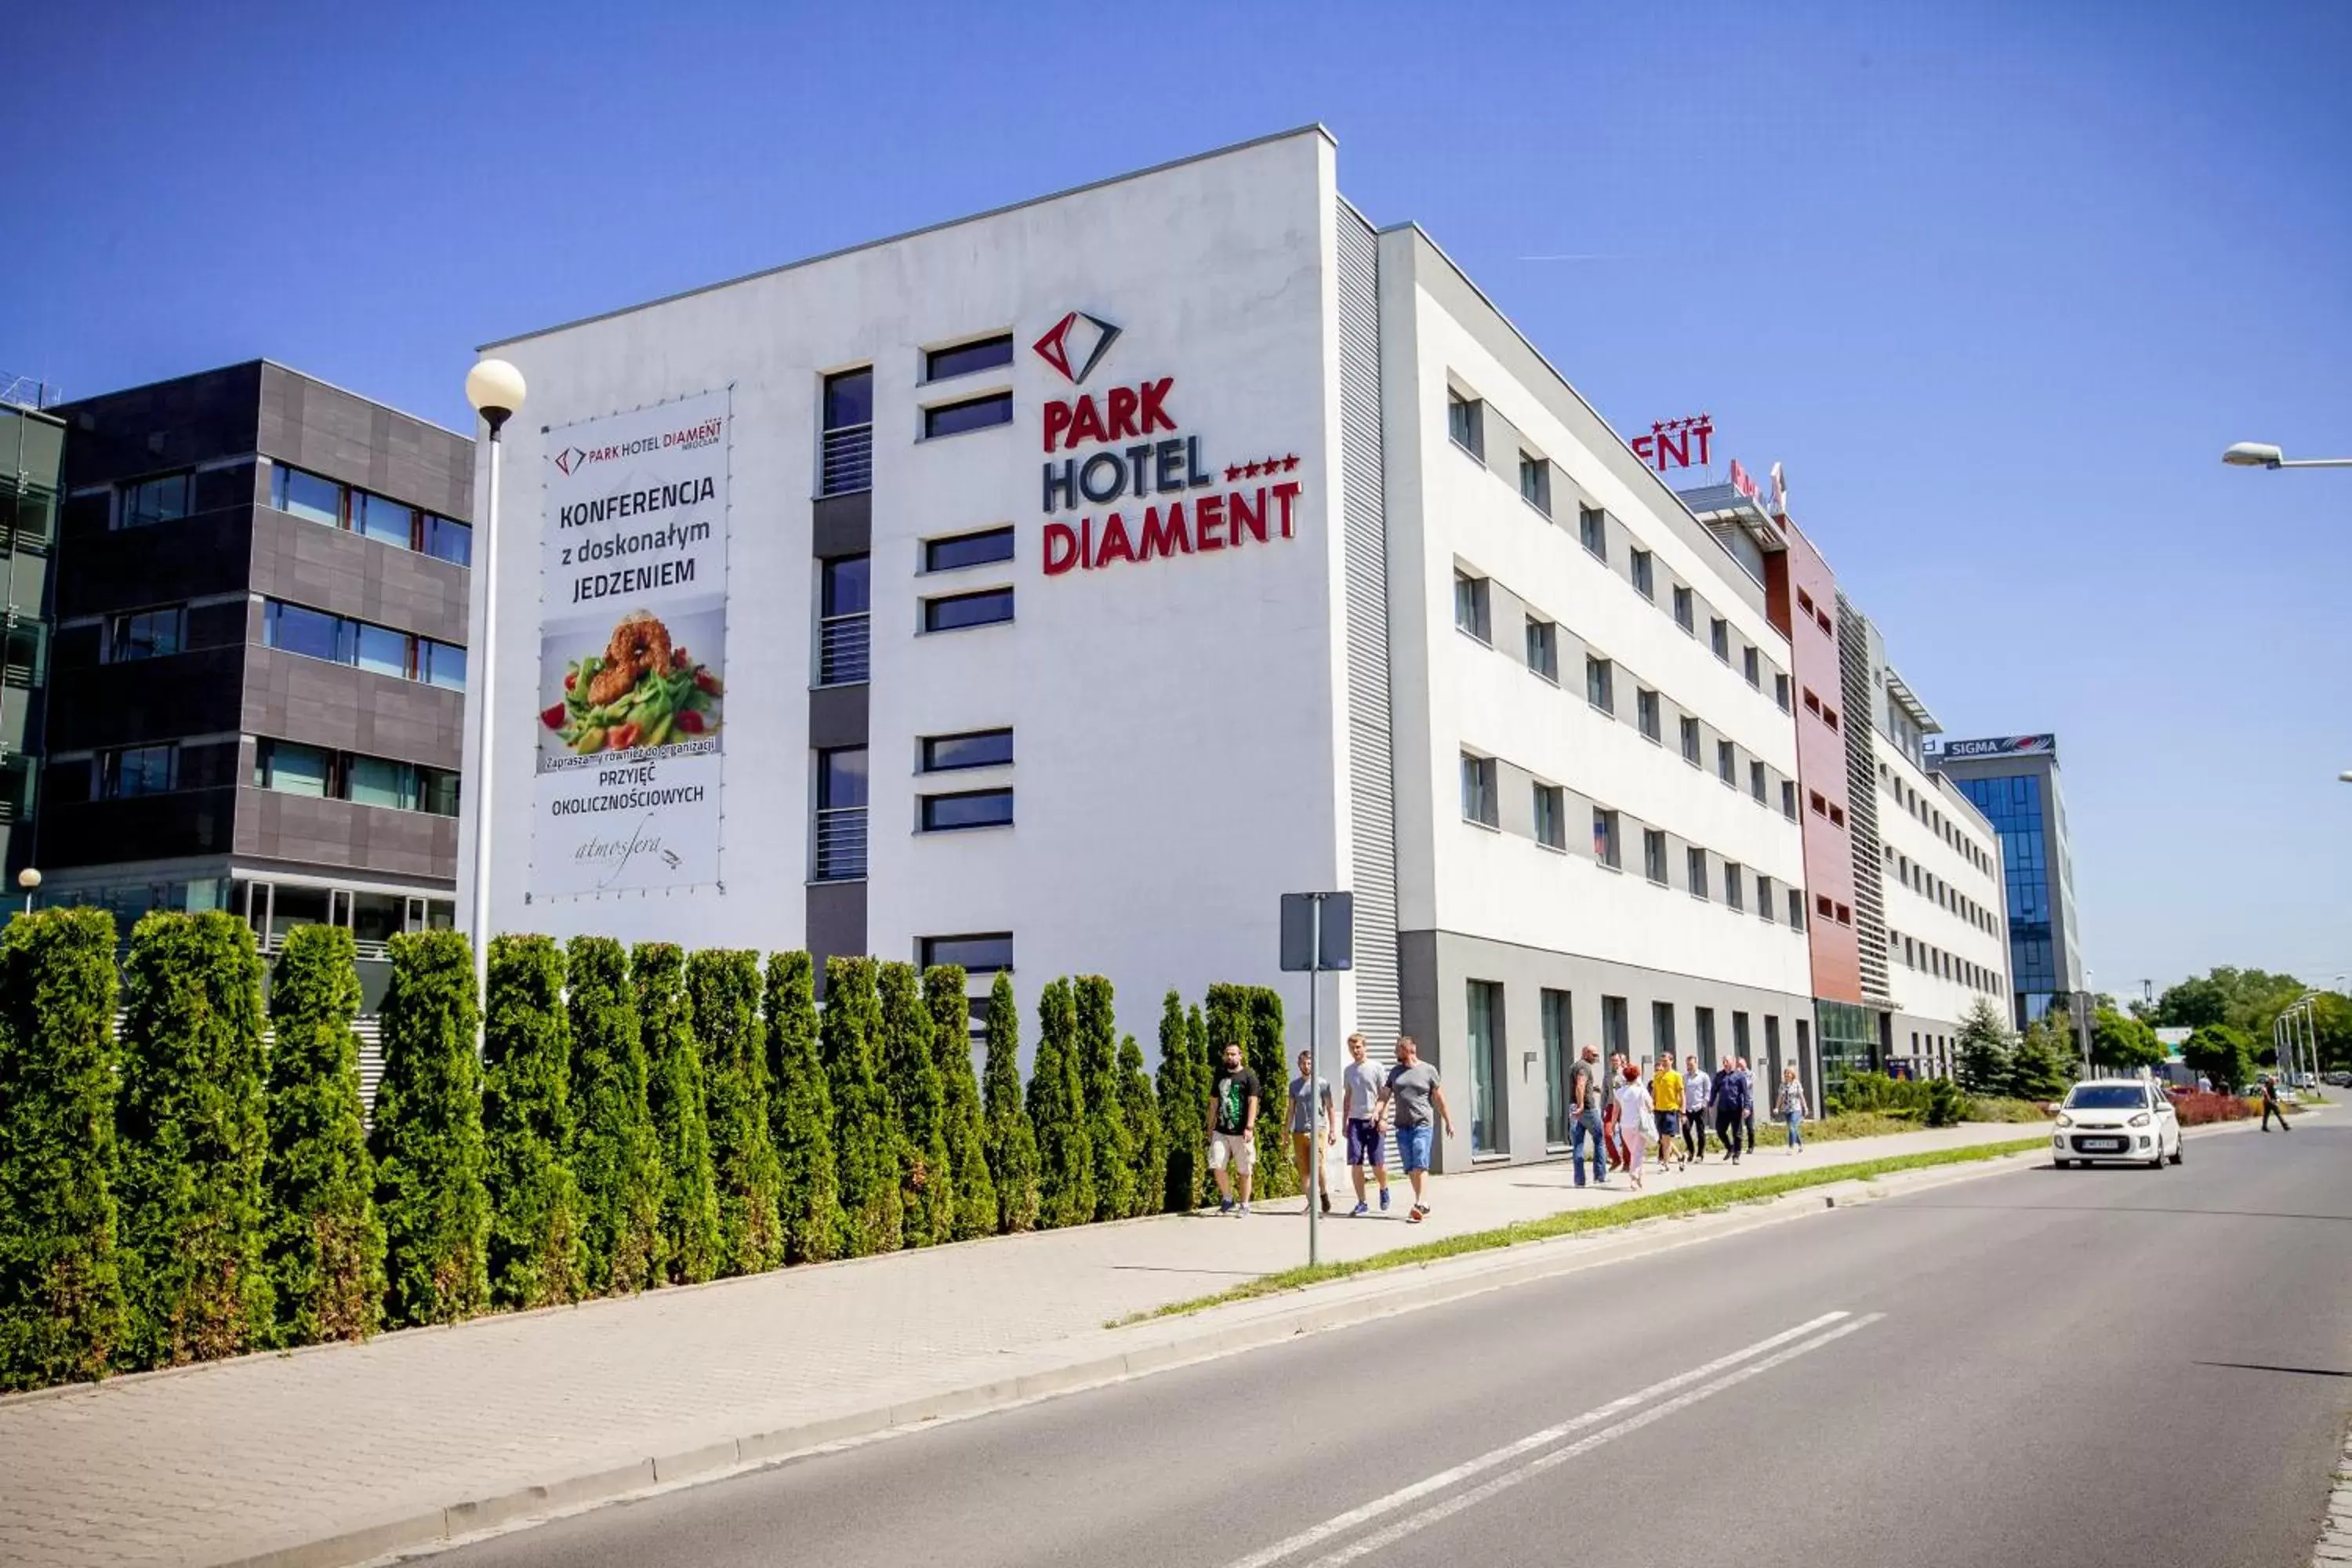 Property building in Park Hotel Diament Wroclaw